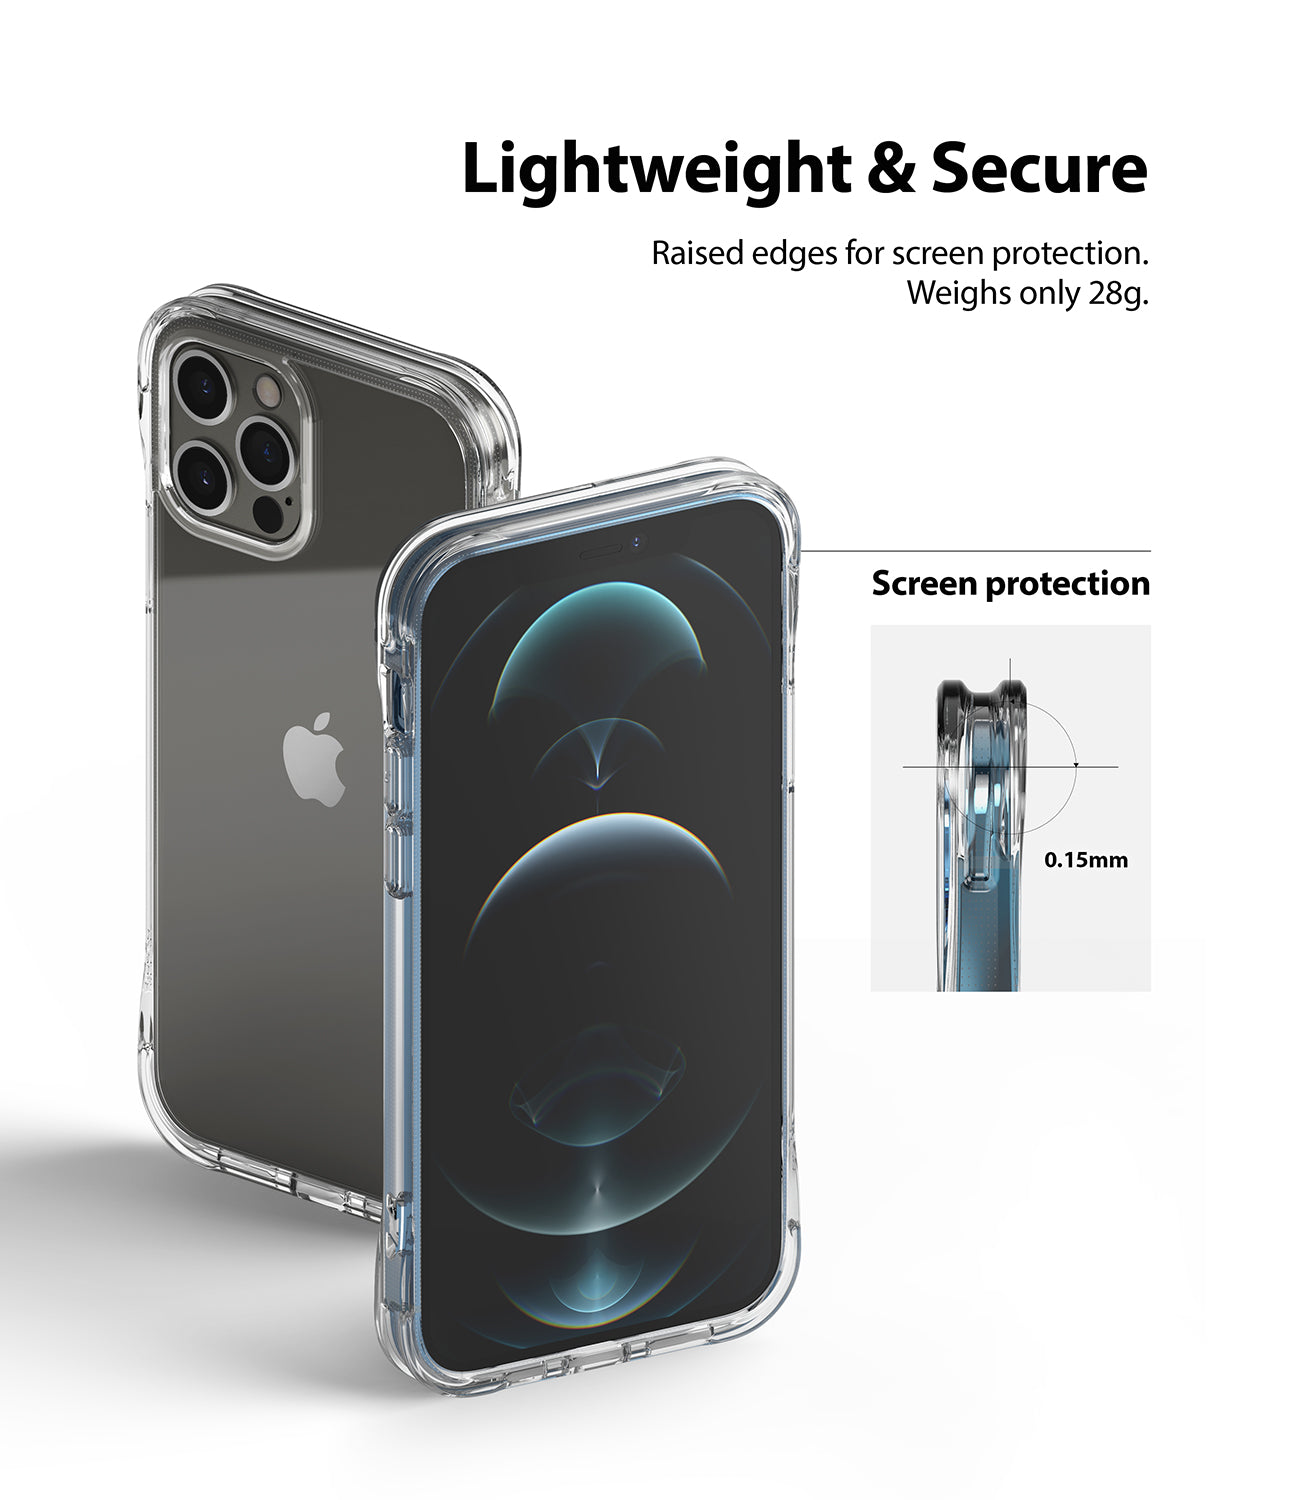 lightweight and secure - raised edges for screen protection